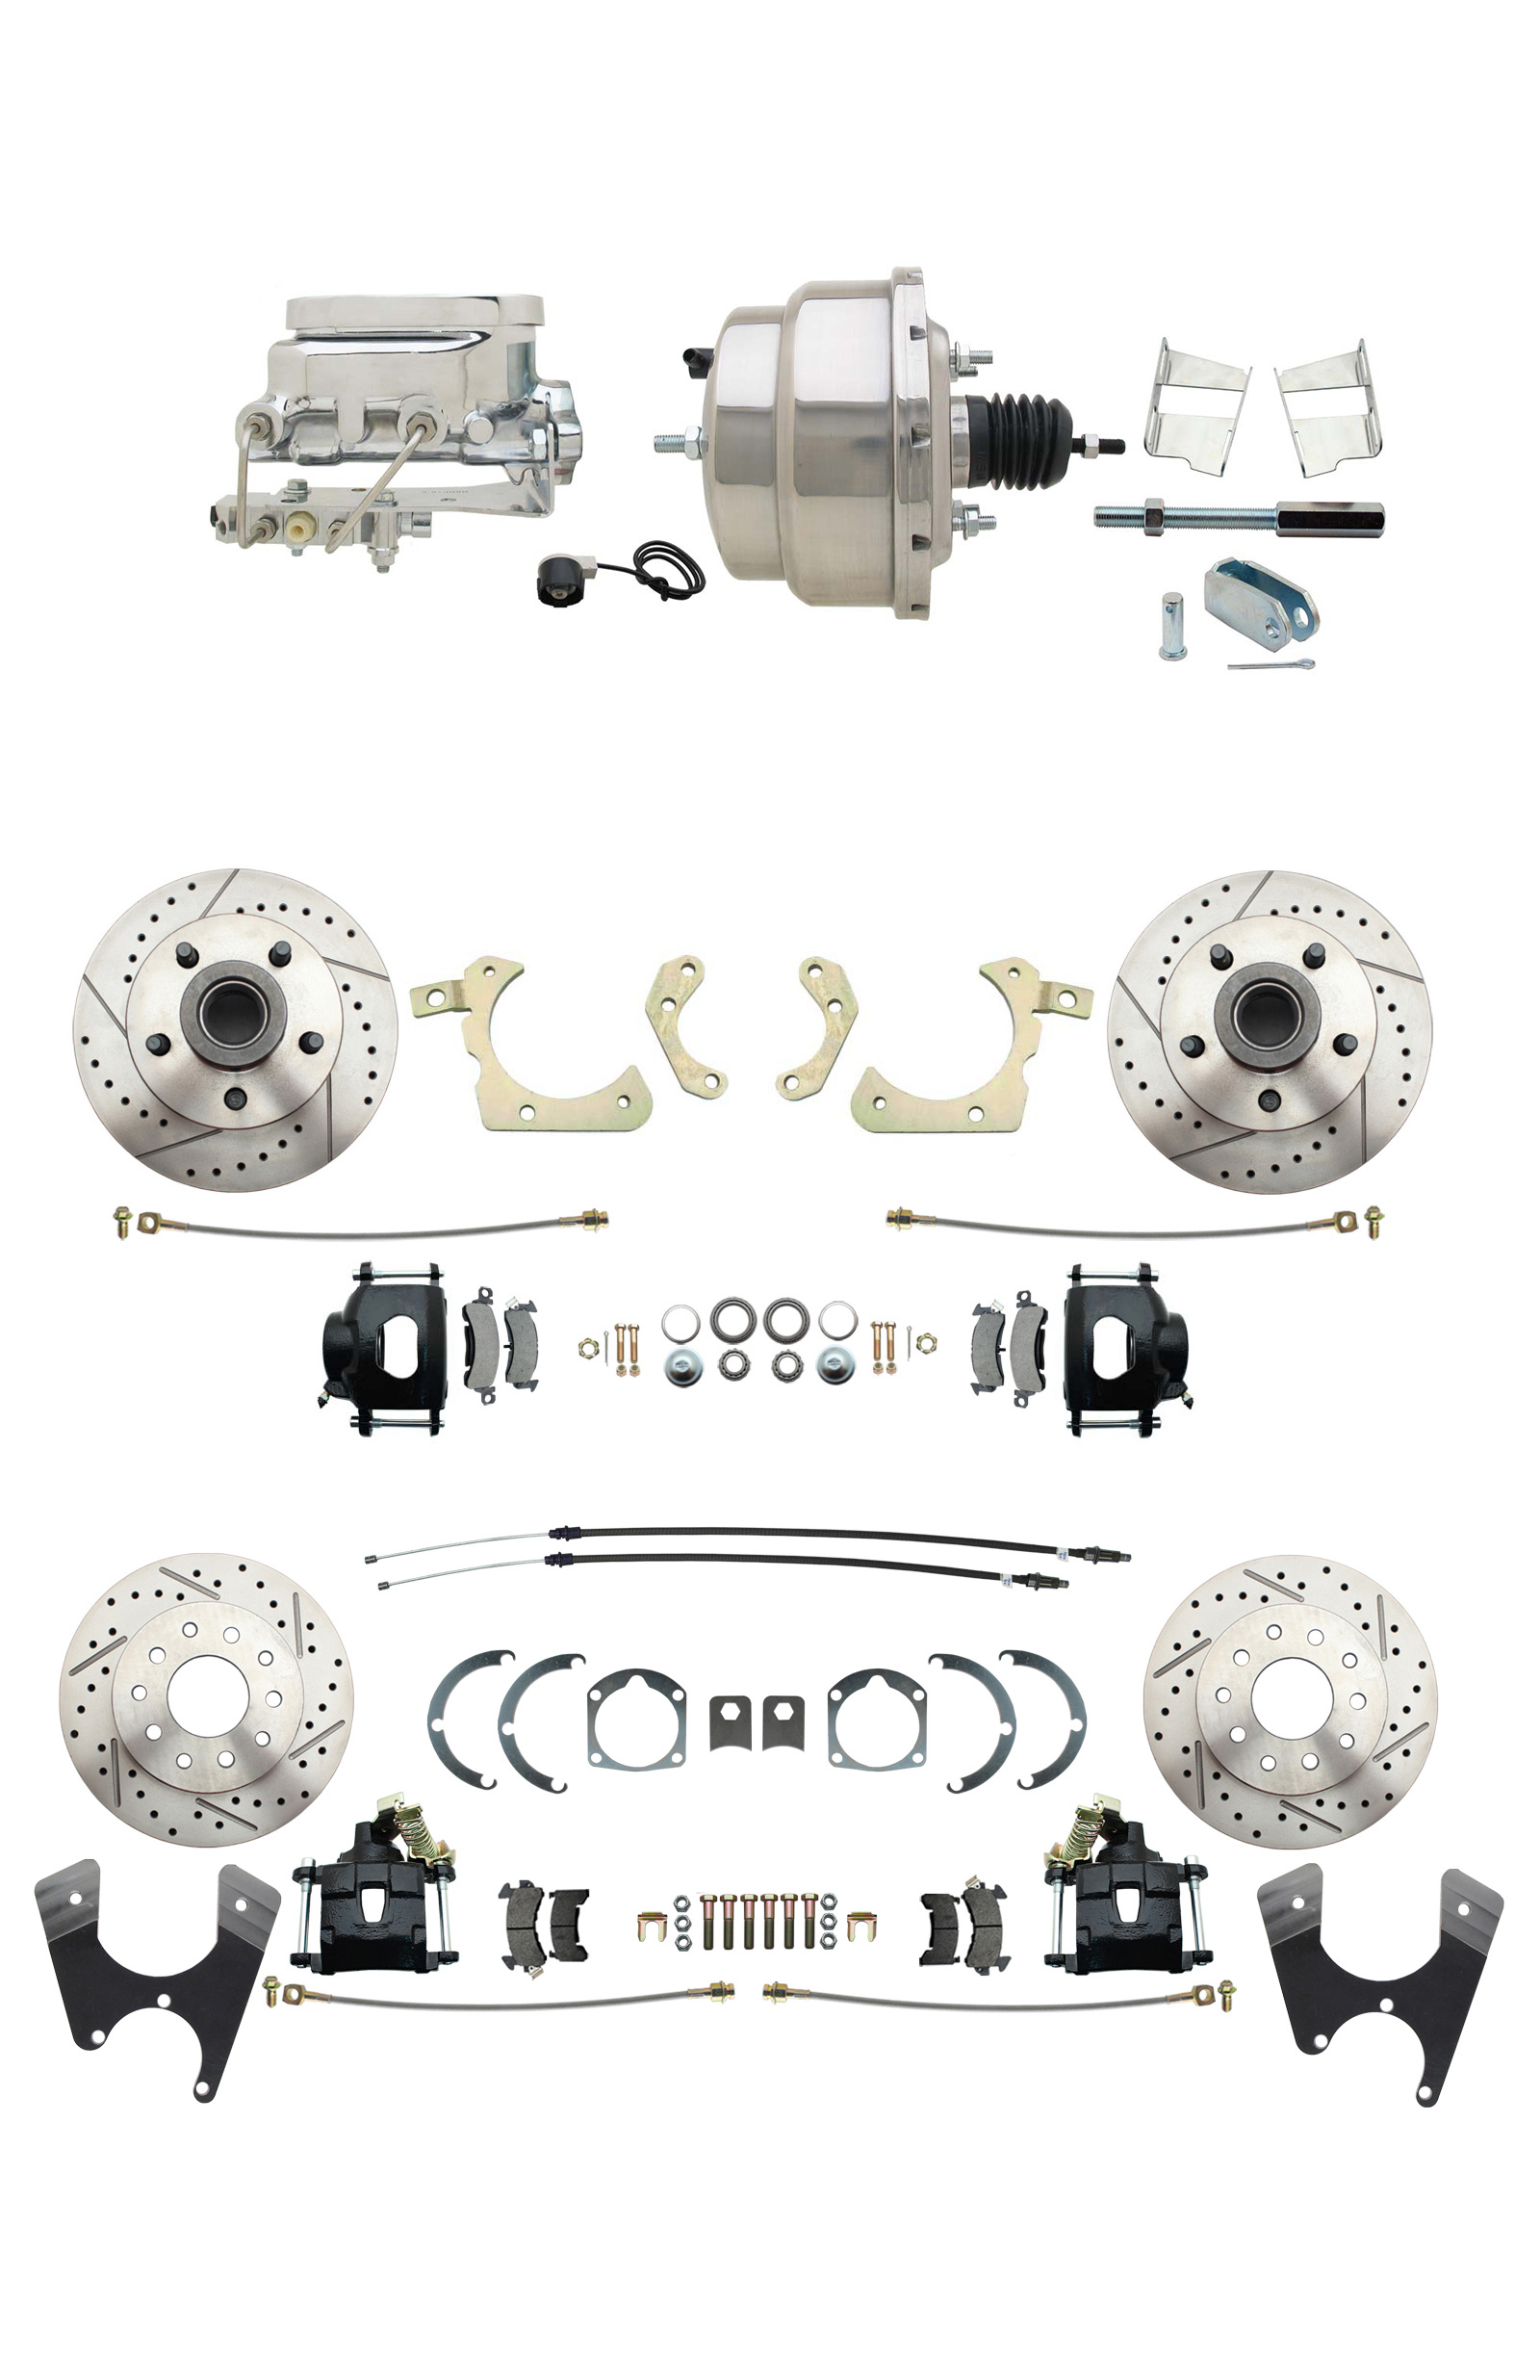 1959-1964 GM Full Size Front & Rear Power Disc Brake Kit Black Powder Coated Calipers Drilled/Slotted Rotors (Impala, Bel Air, Biscayne) & 8 Dual Chrome Booster Conversion Kit W/ Flat Top Chrome Master Cylinder Bottom M